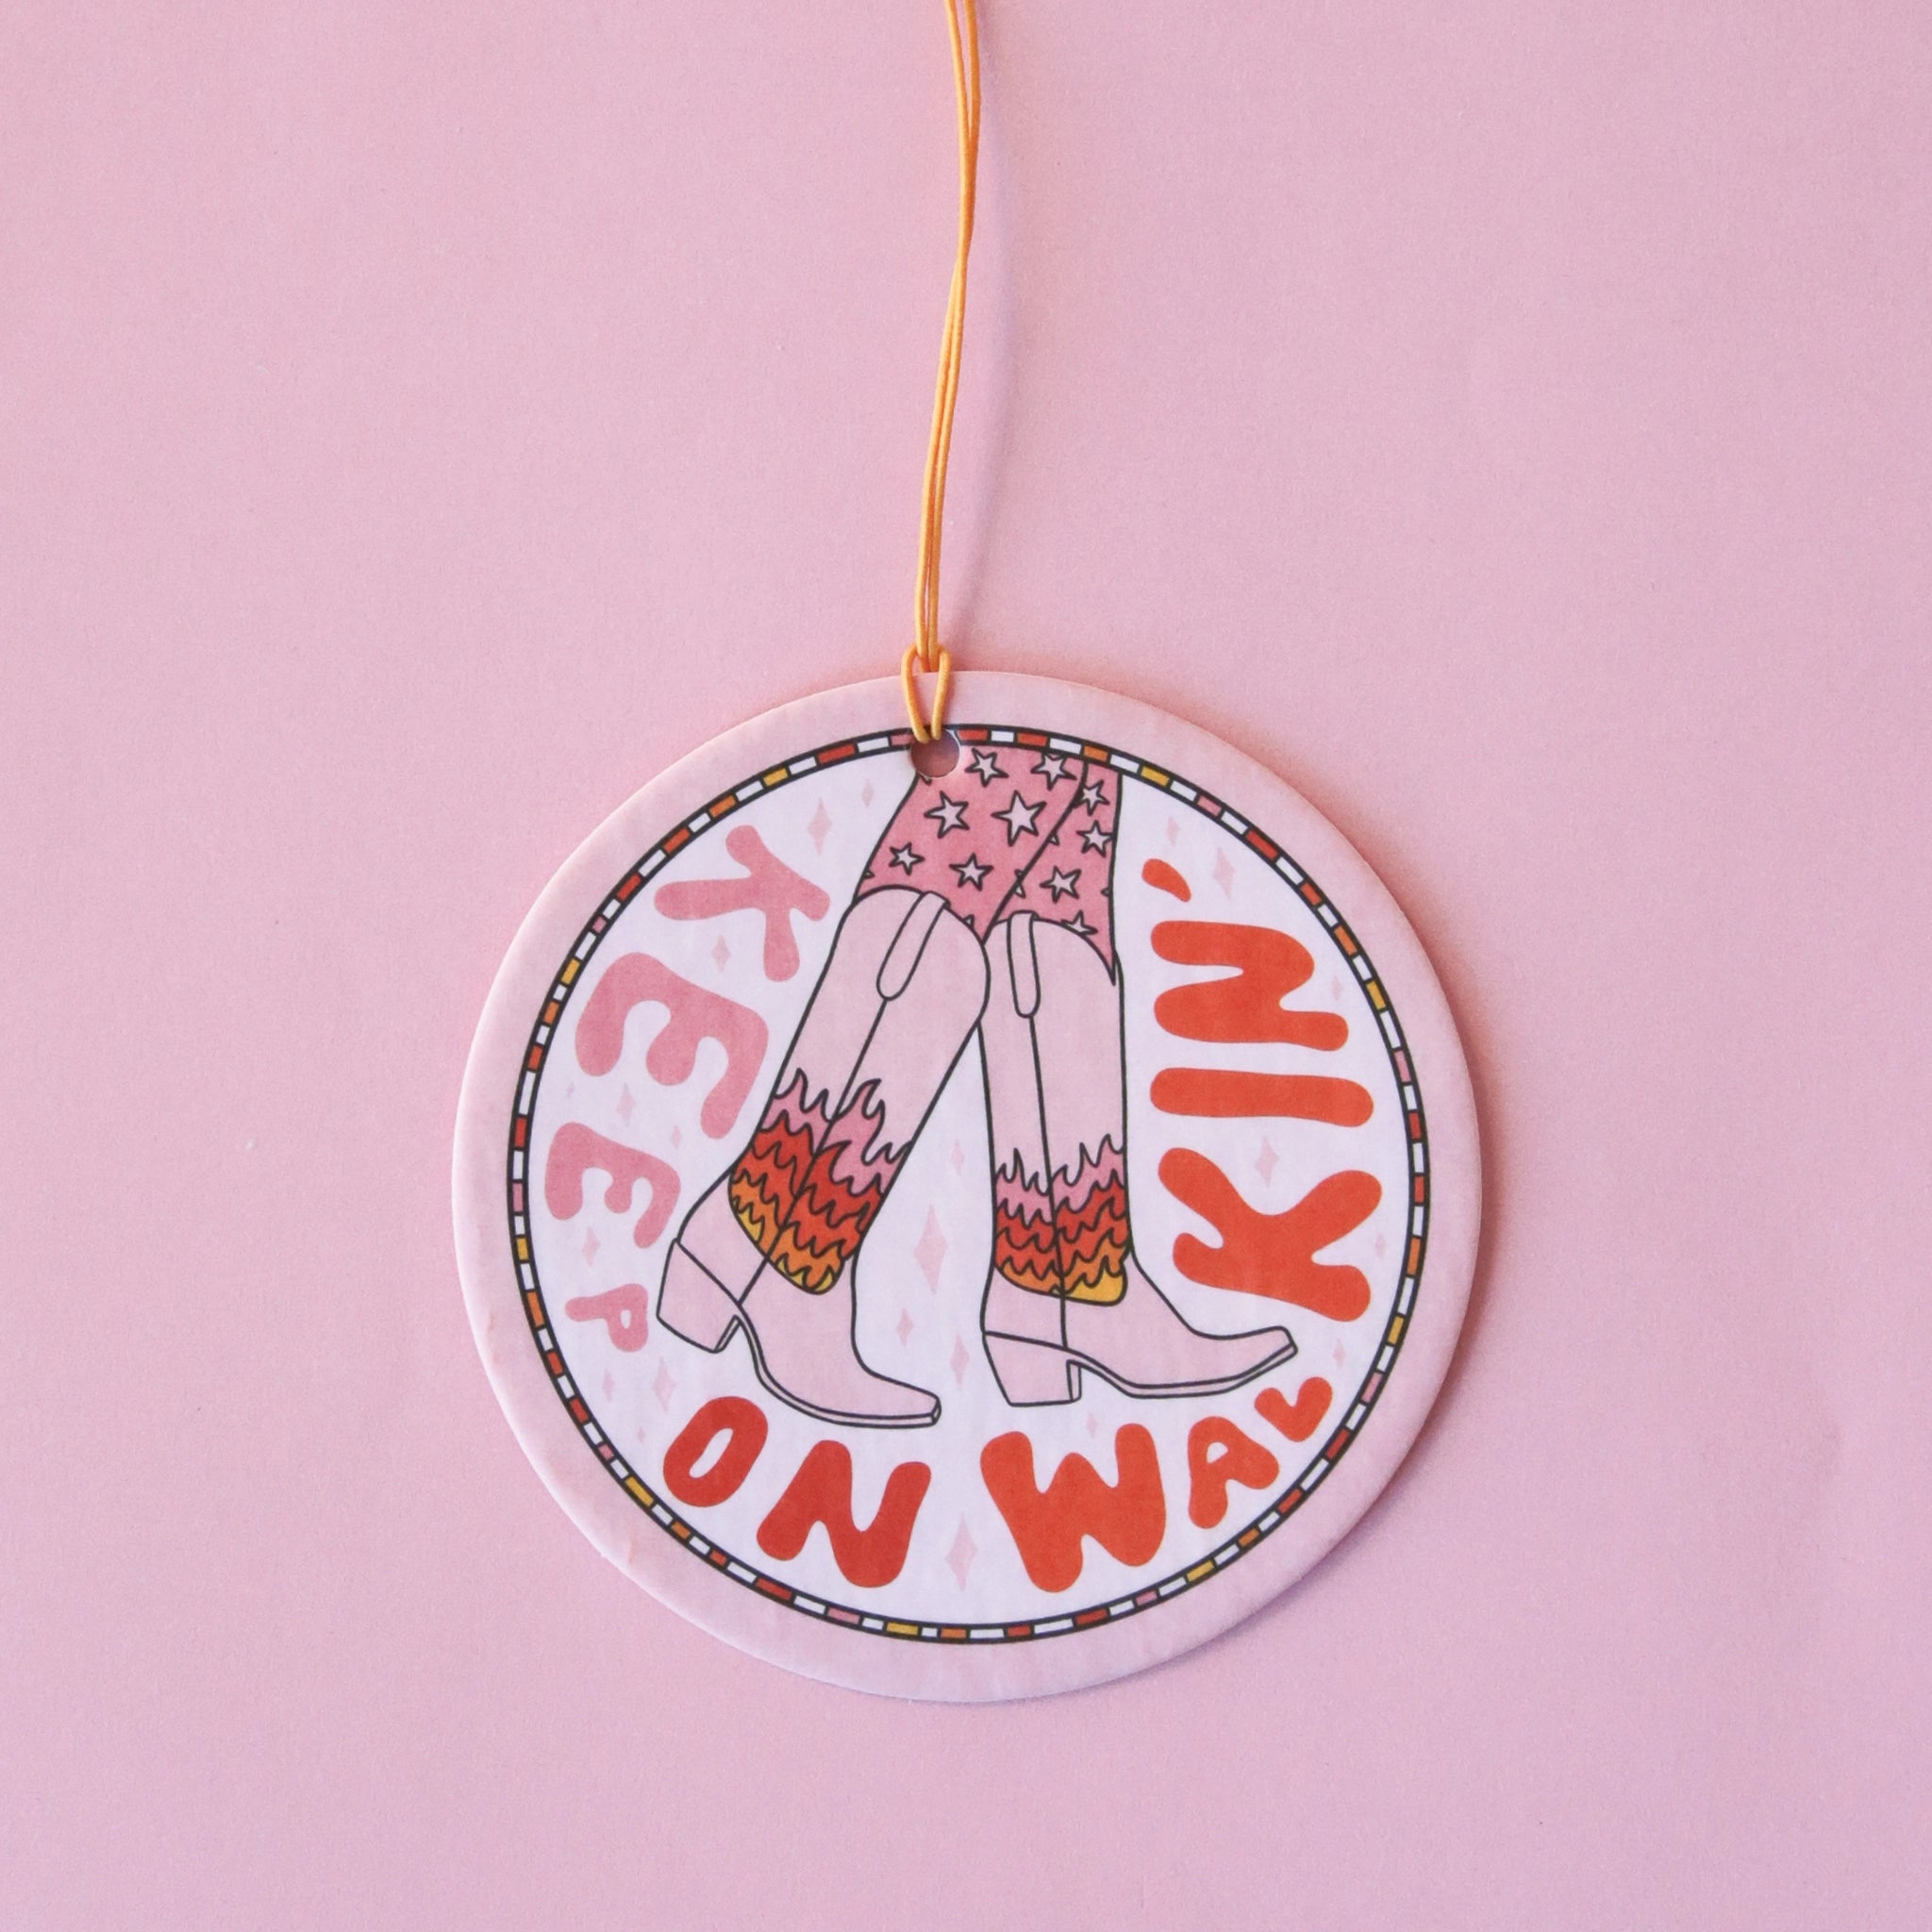 A light pink circle air freshener with a elastic loop for hanging and a cowgirl boot graphic with fire details on them and text that reads, "Keep On Walking'" in keep and red text around the edge of the air freshener.